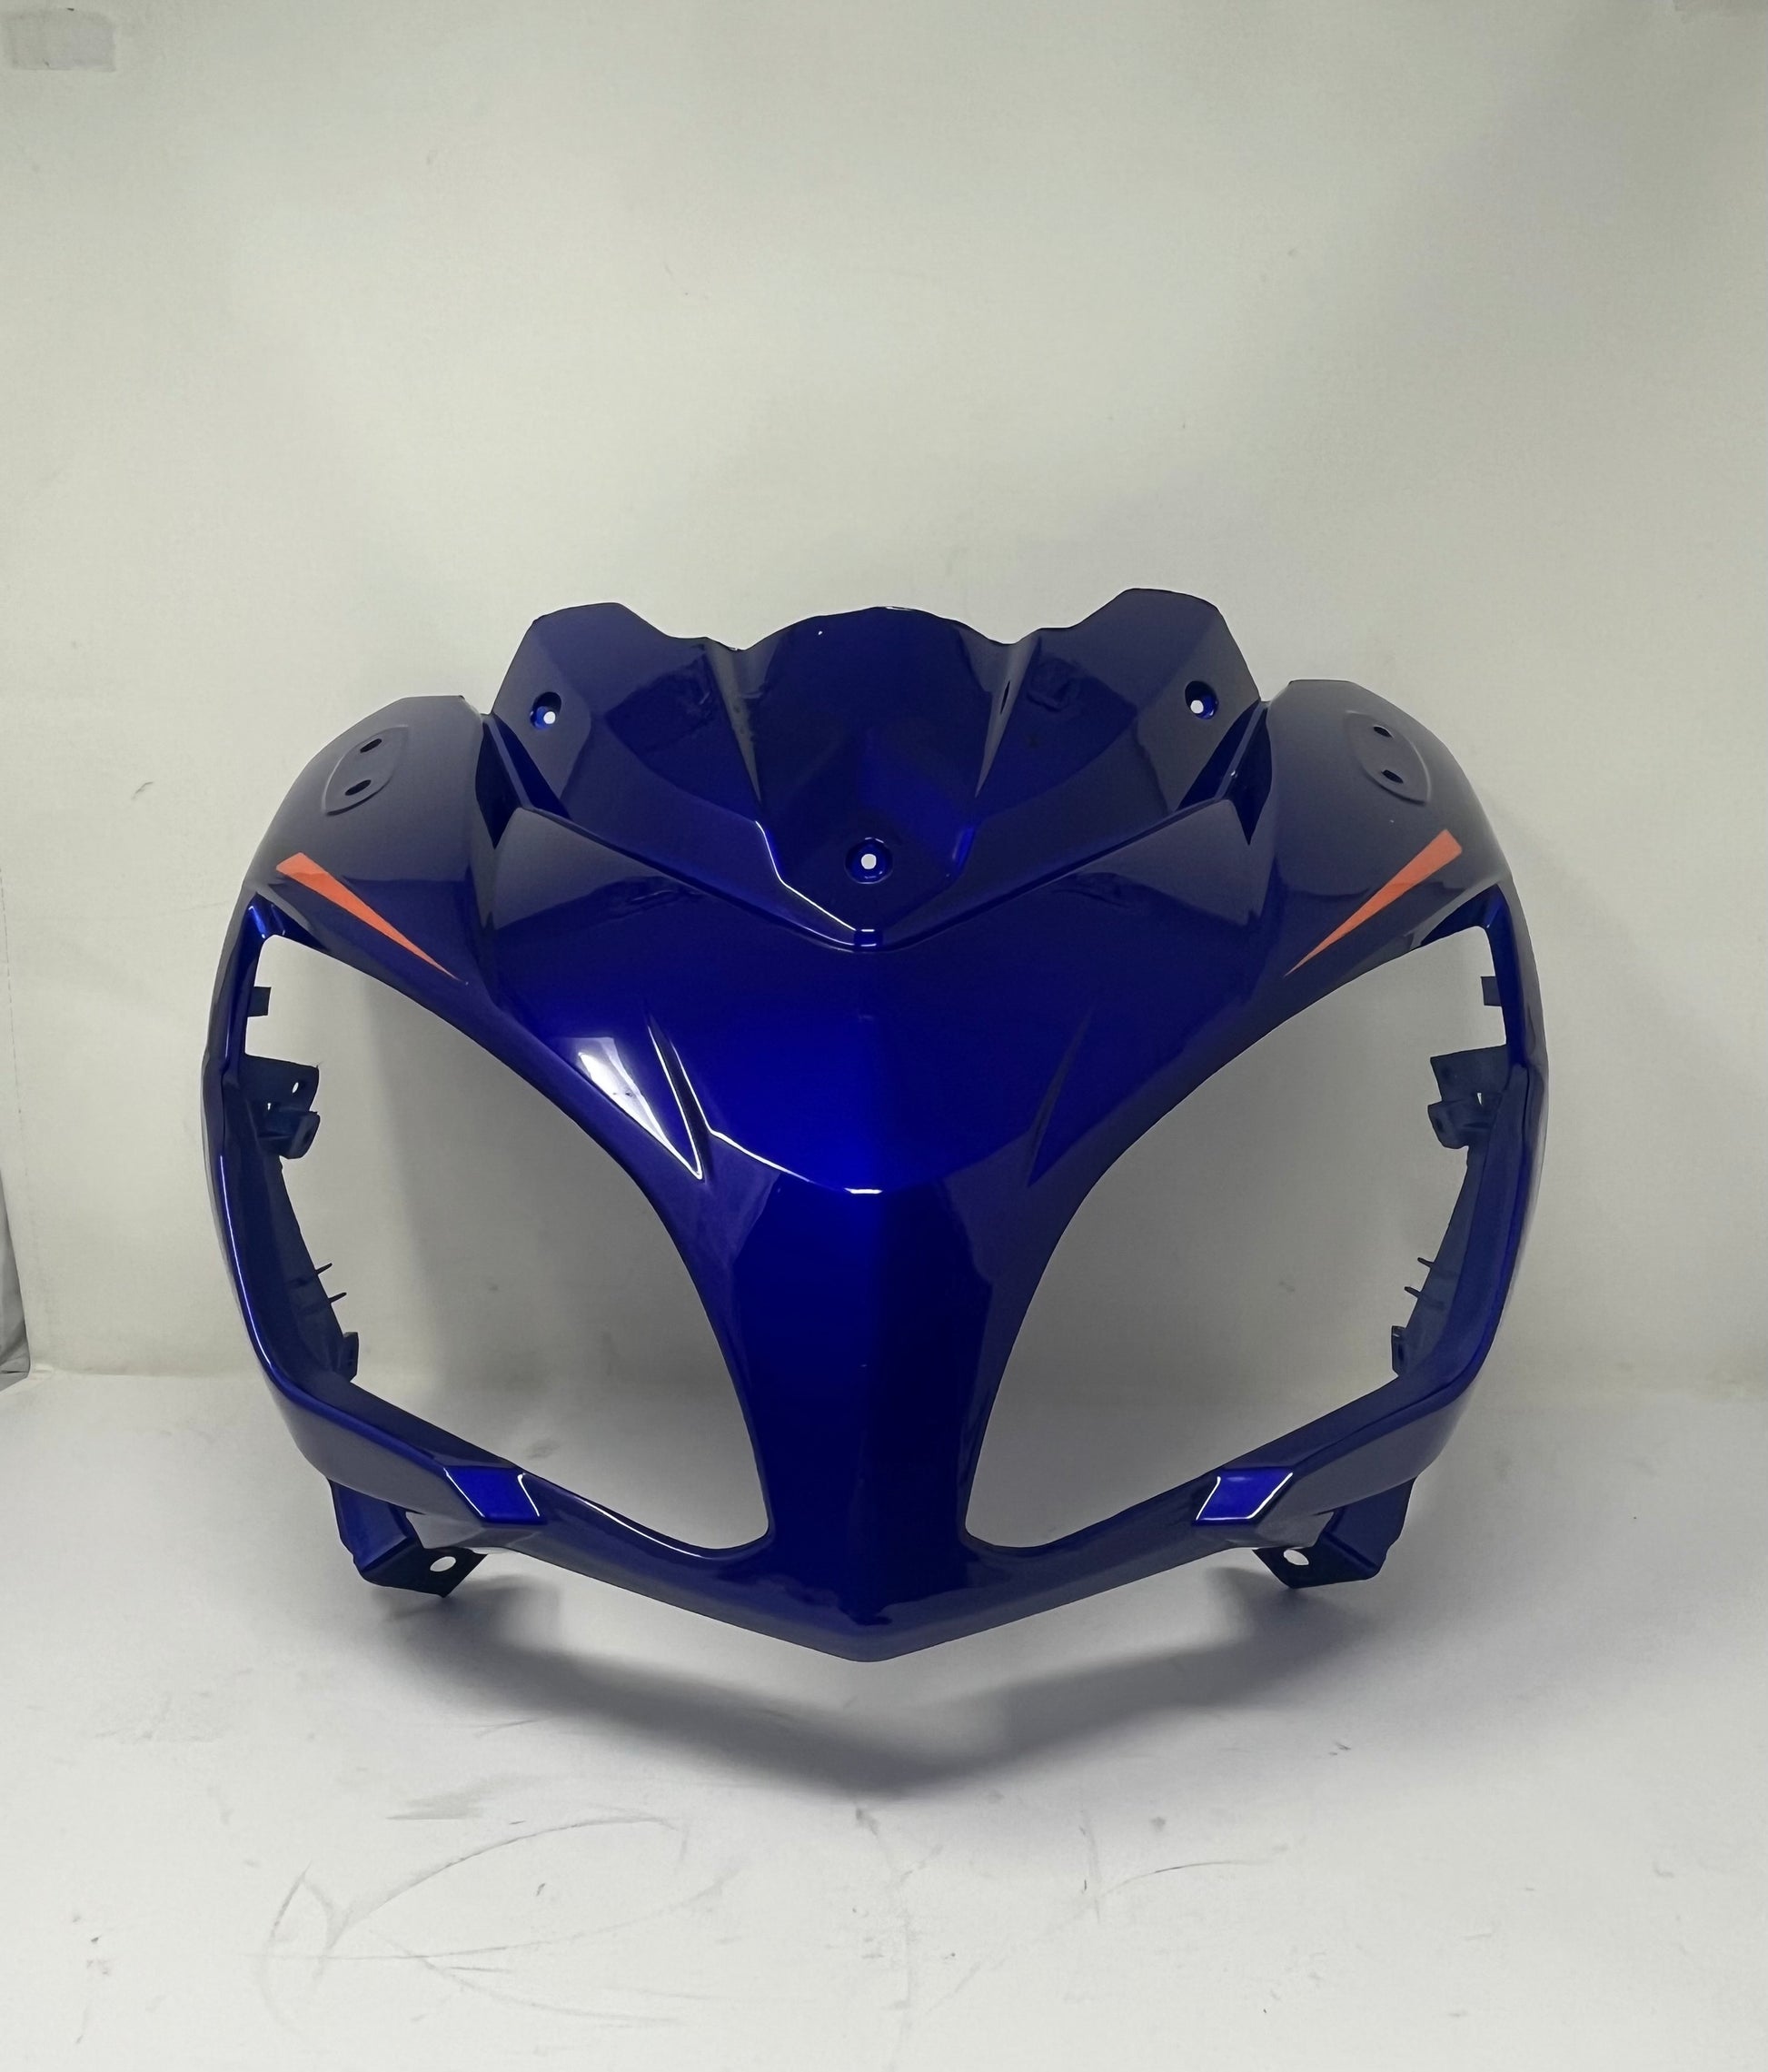 Nose cone for DF250RTS. Headlight fairing for sale DF250RTS. 